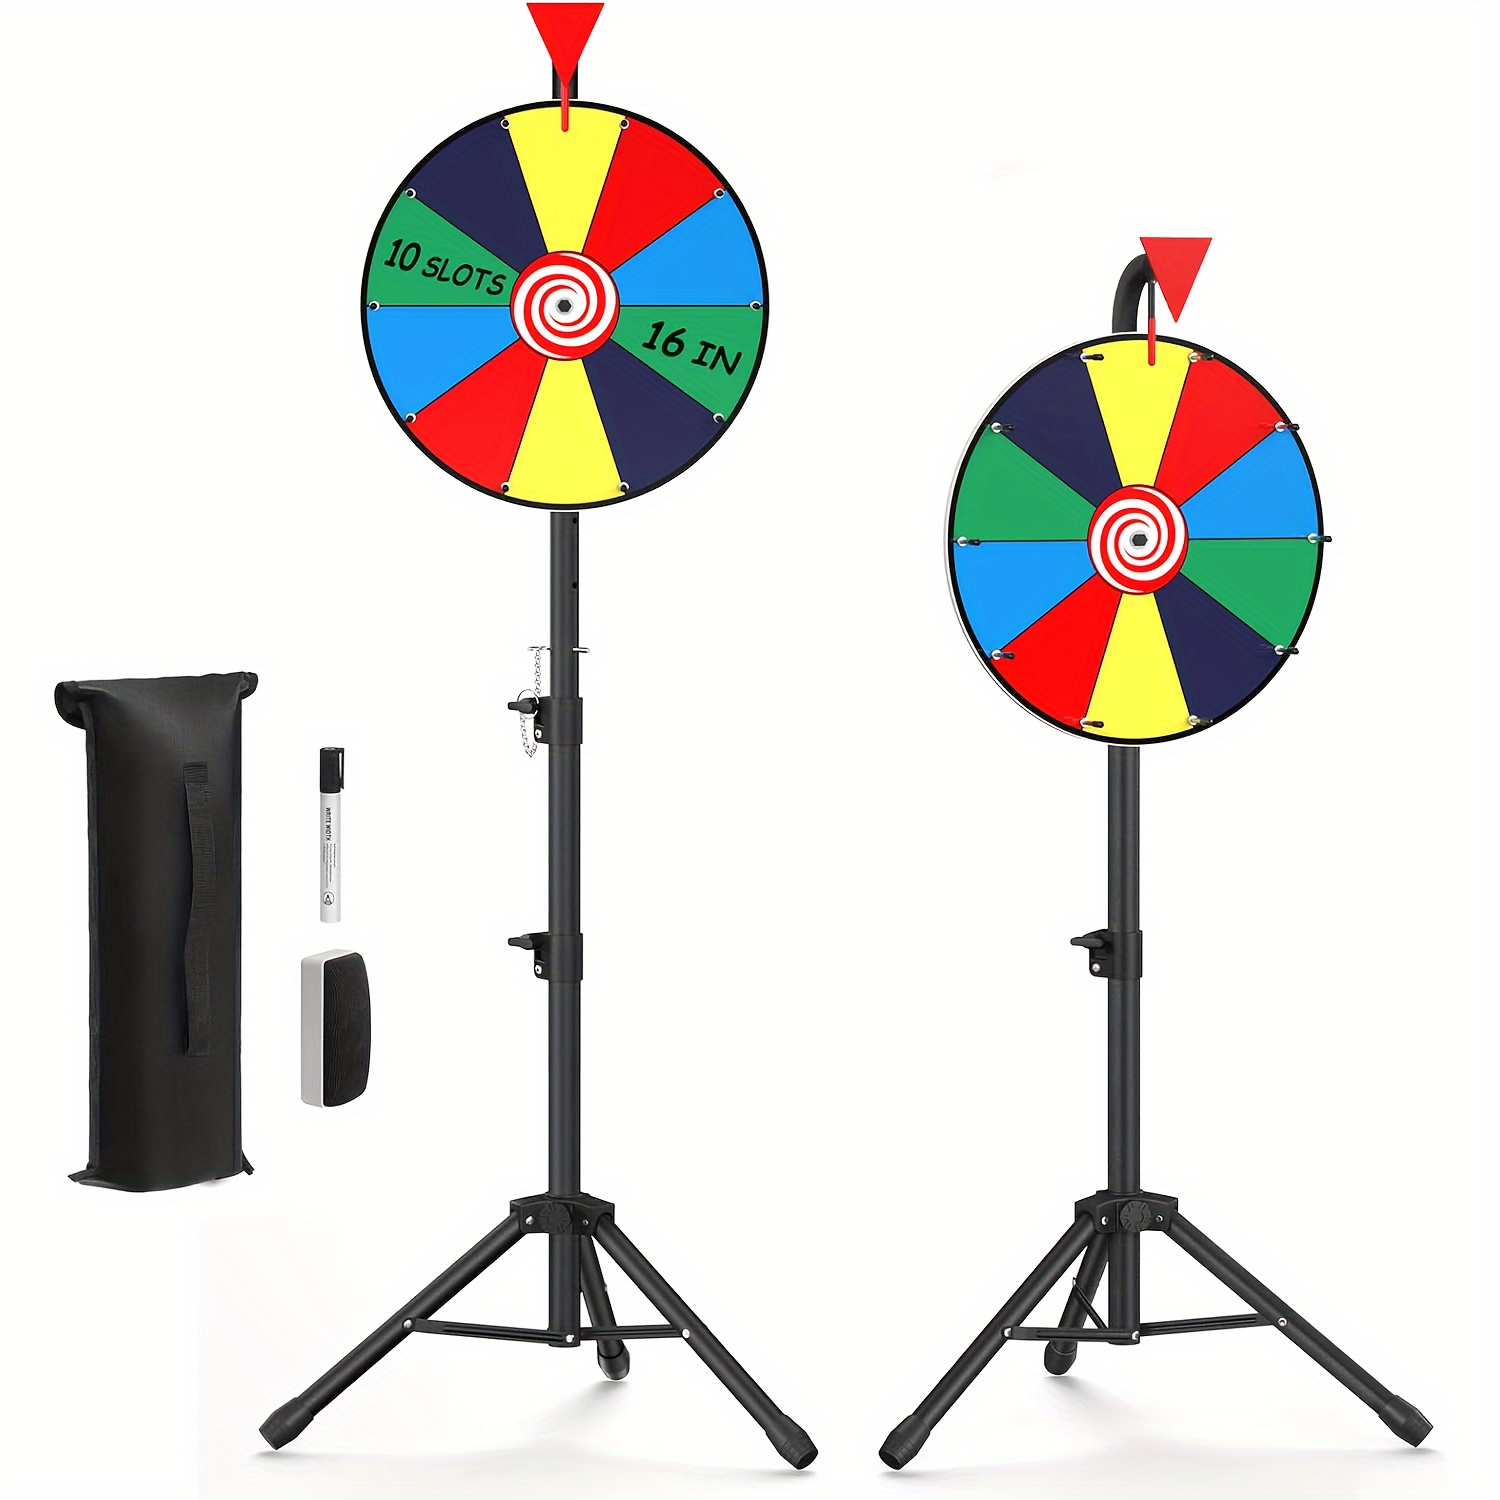 Shot Spinner - Spin The Arrow To Decide Your Fate 